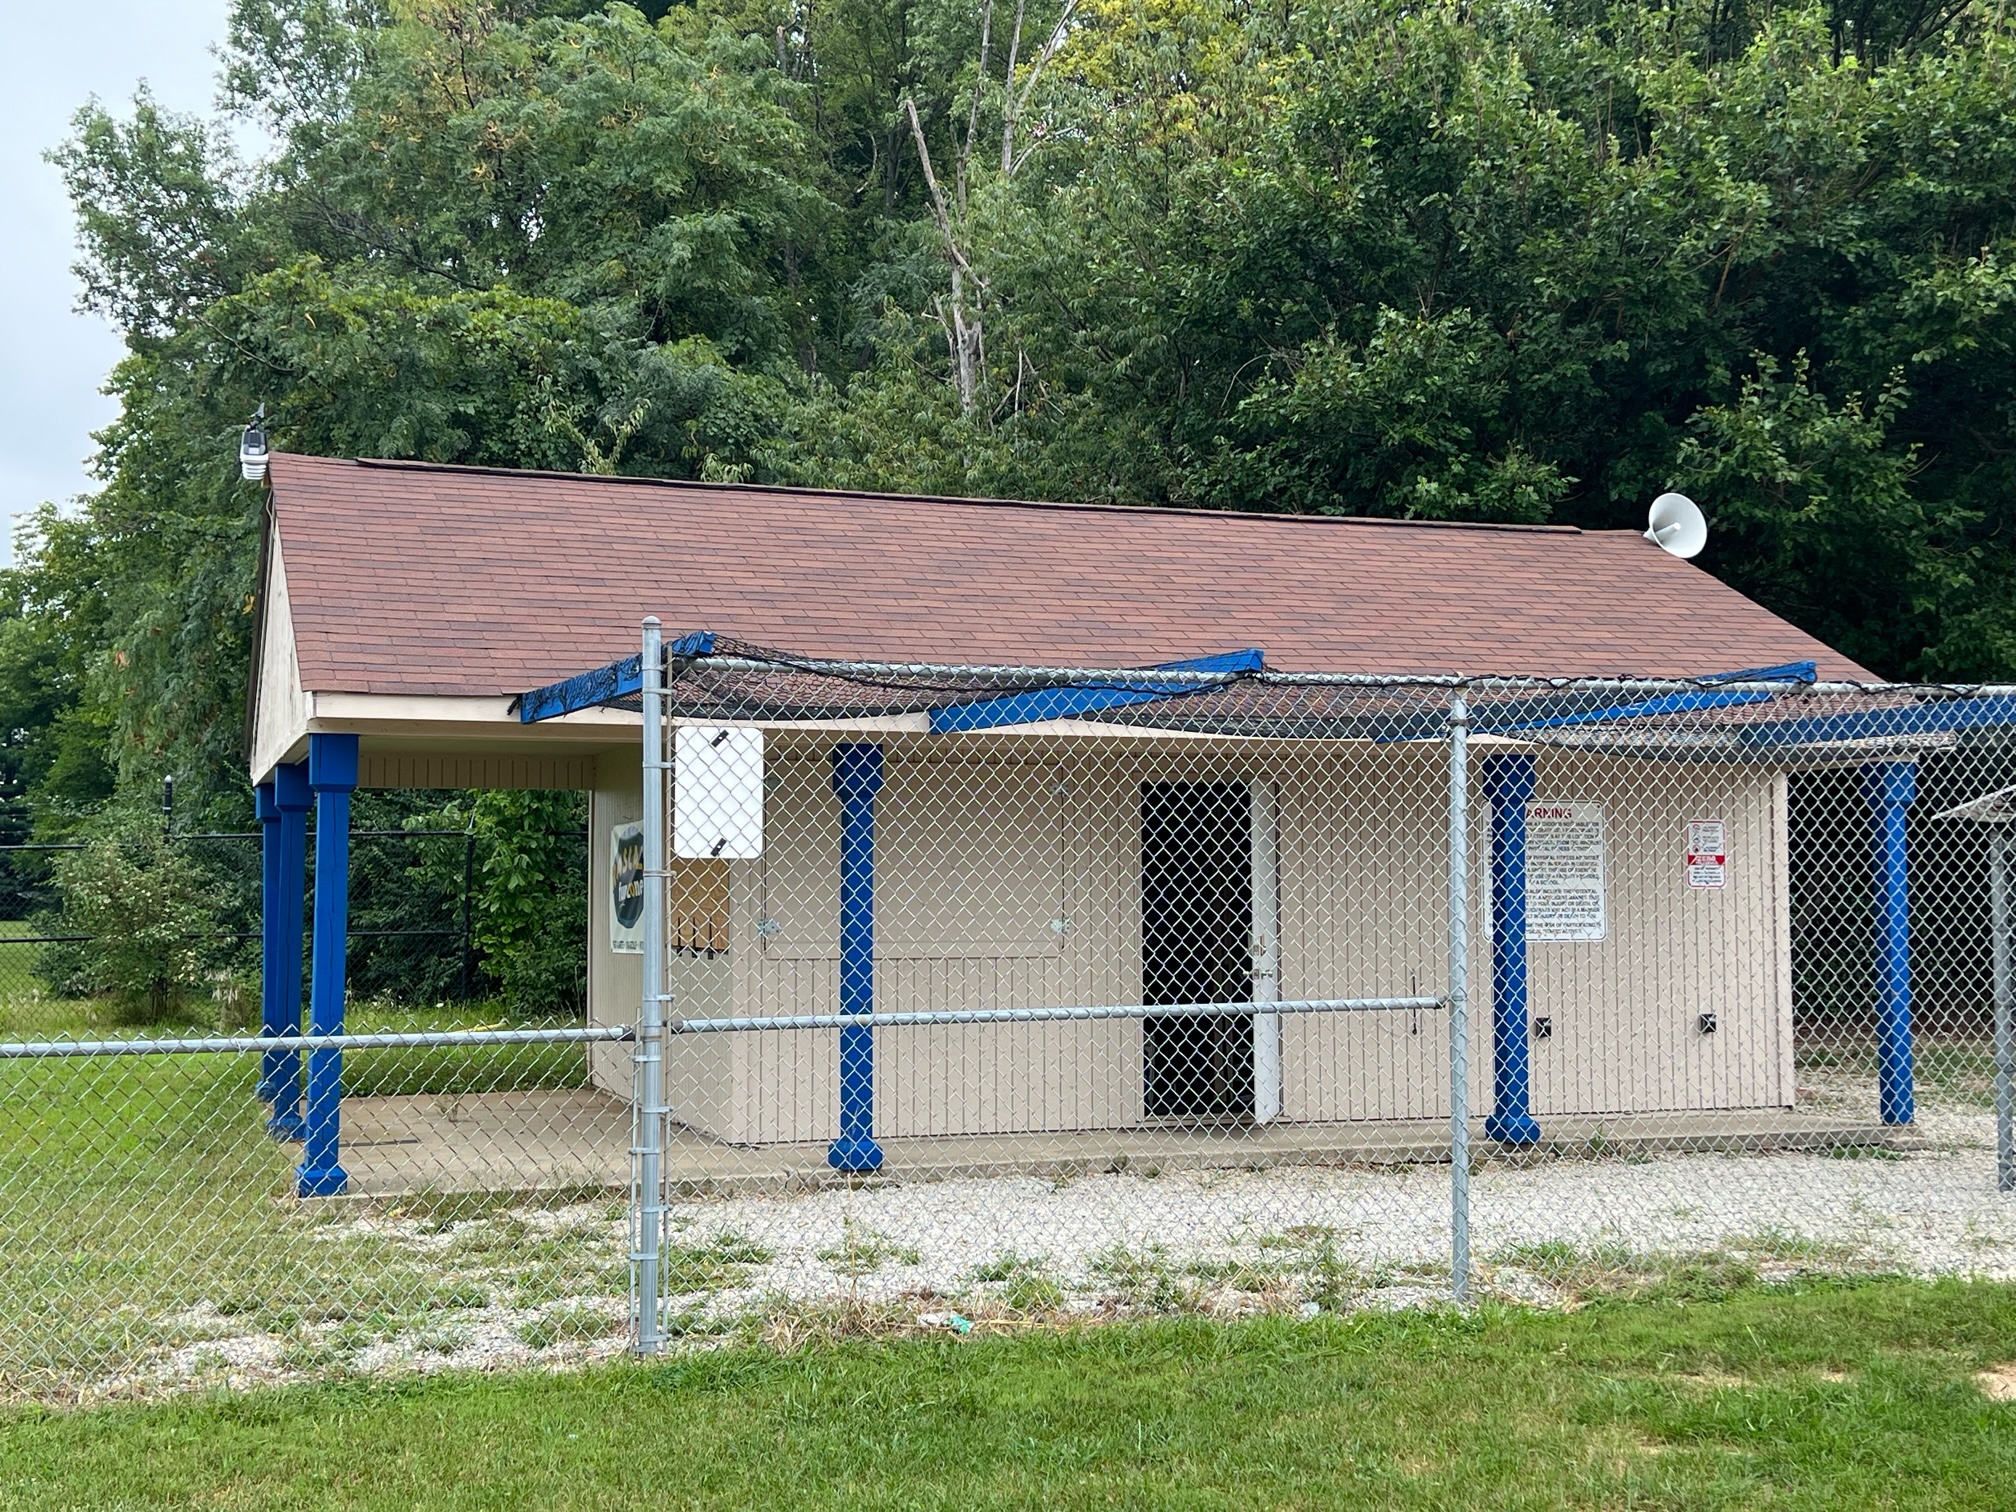 AcuRite Atlas on Top of Greatert Whiteland Girls Softball League Concession Stand, Side View